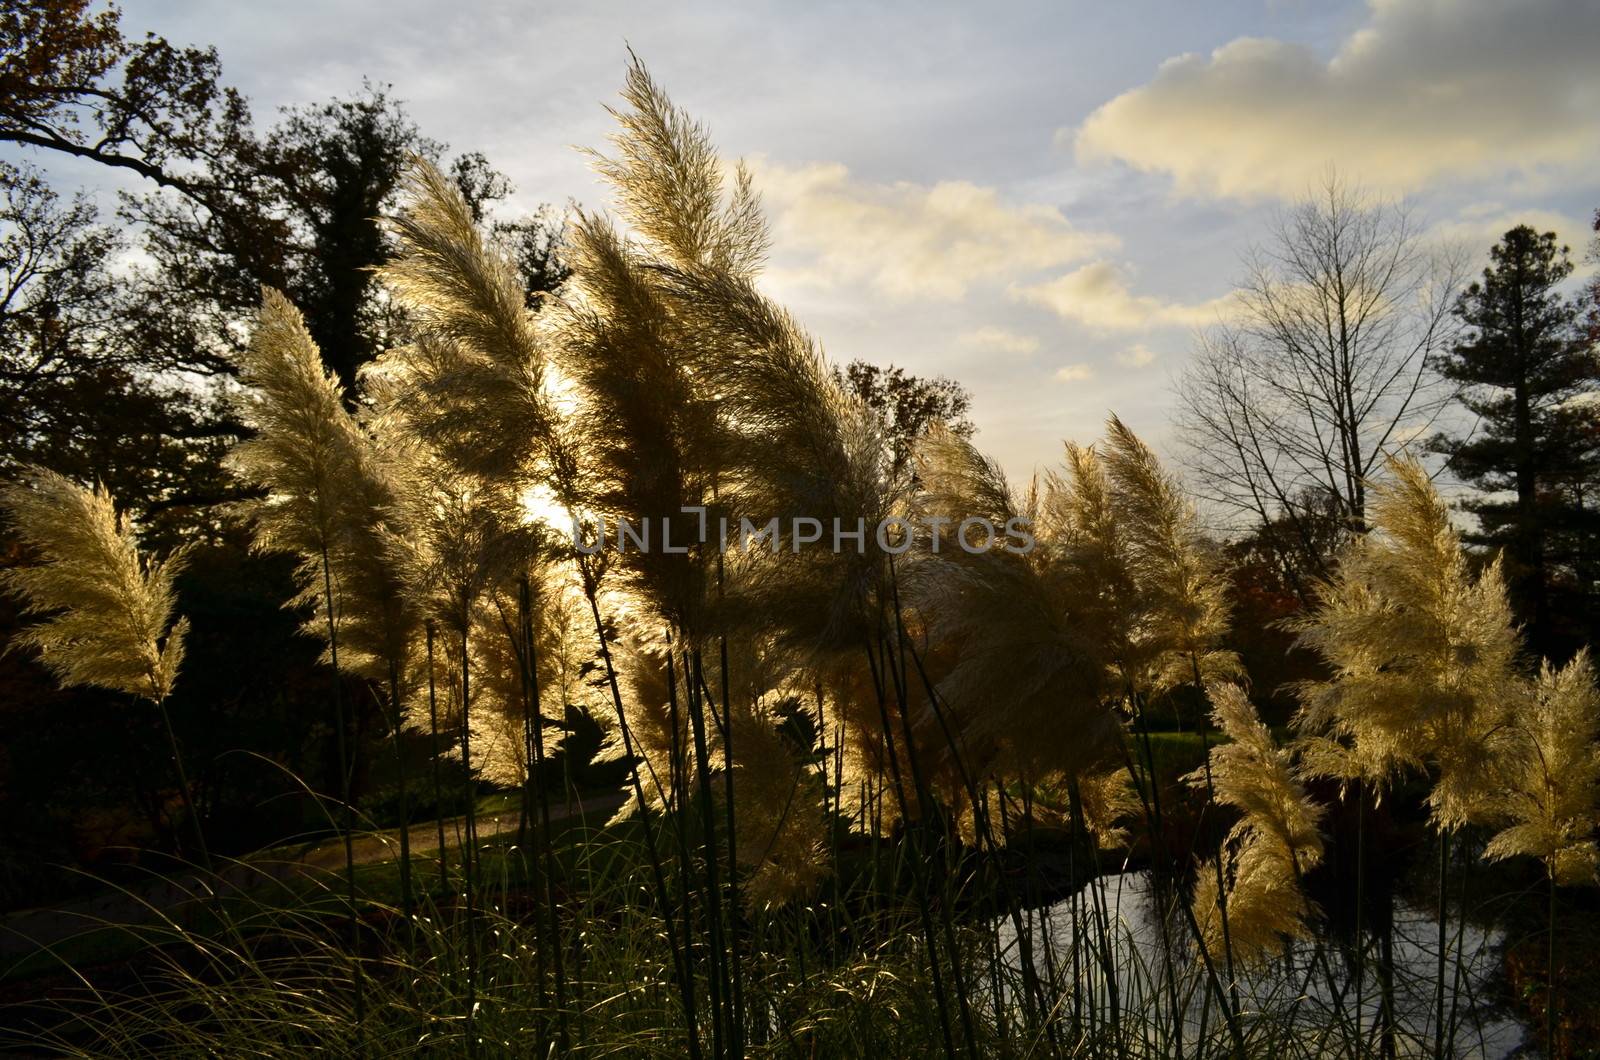 Pampas grass on a riverbank swaying in the breeze of an Autumn evening in England.image taken in November 2013.